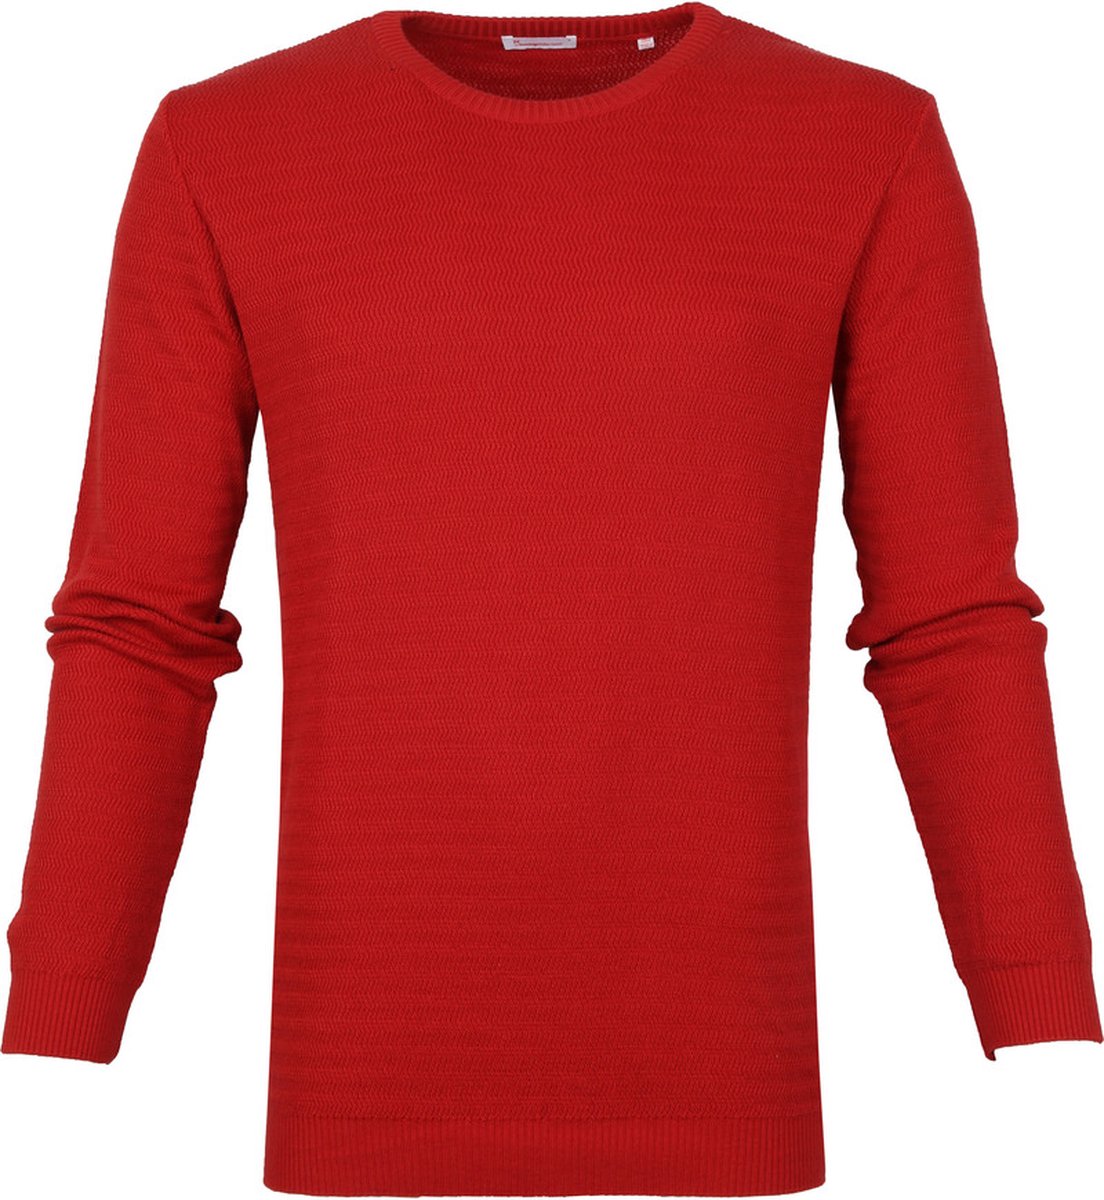 KnowledgeCotton Apparel - Trui Waves Rood - Maat L - Modern-fit